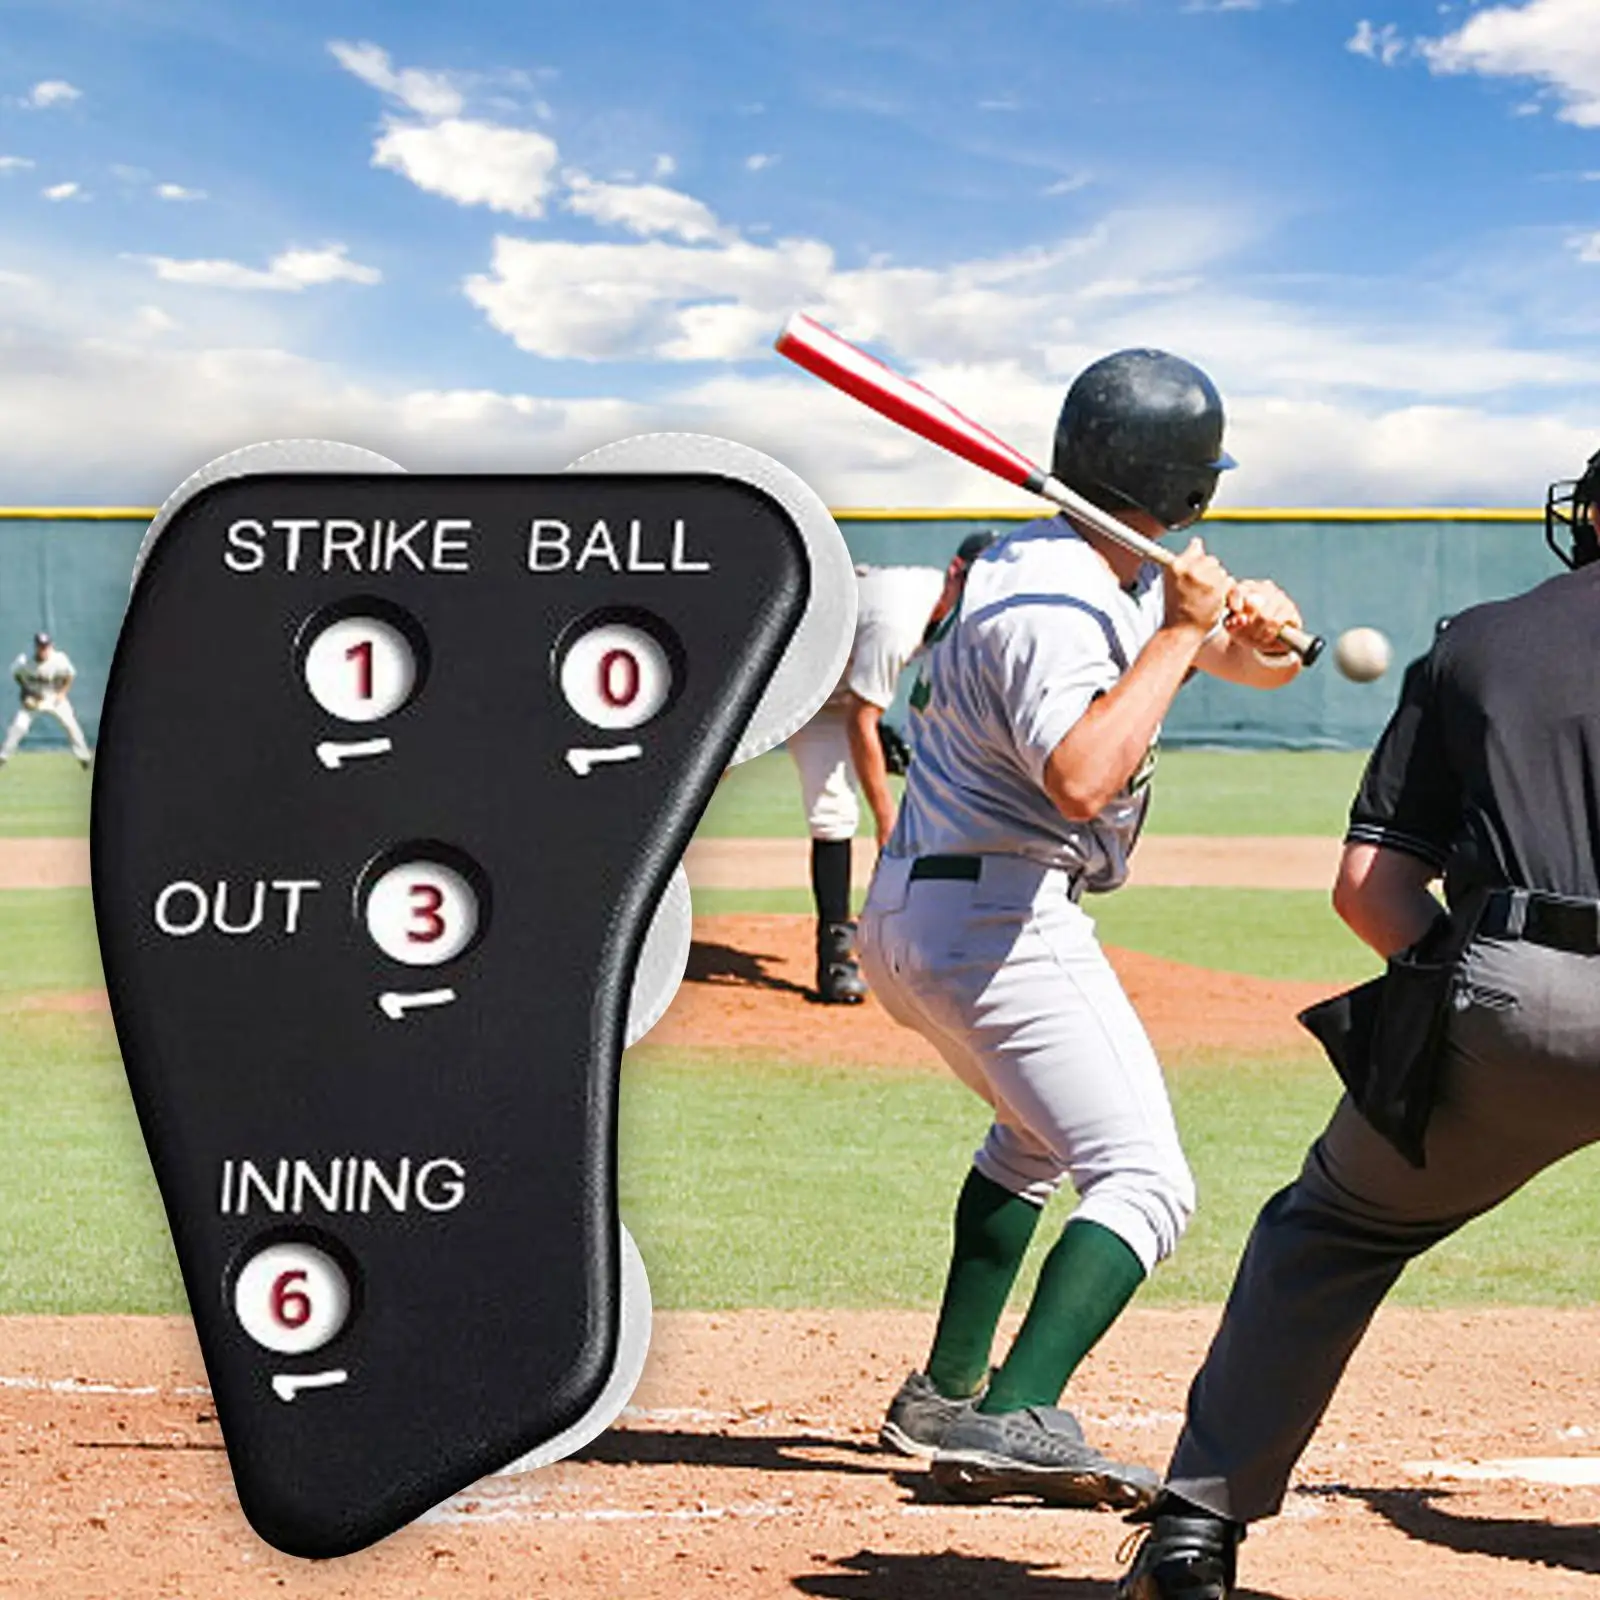 Baseball Umpire Non Slip Surface Supplies Referee Device Umpire Indicator 4 Dial for Ball Strike Innings Outs